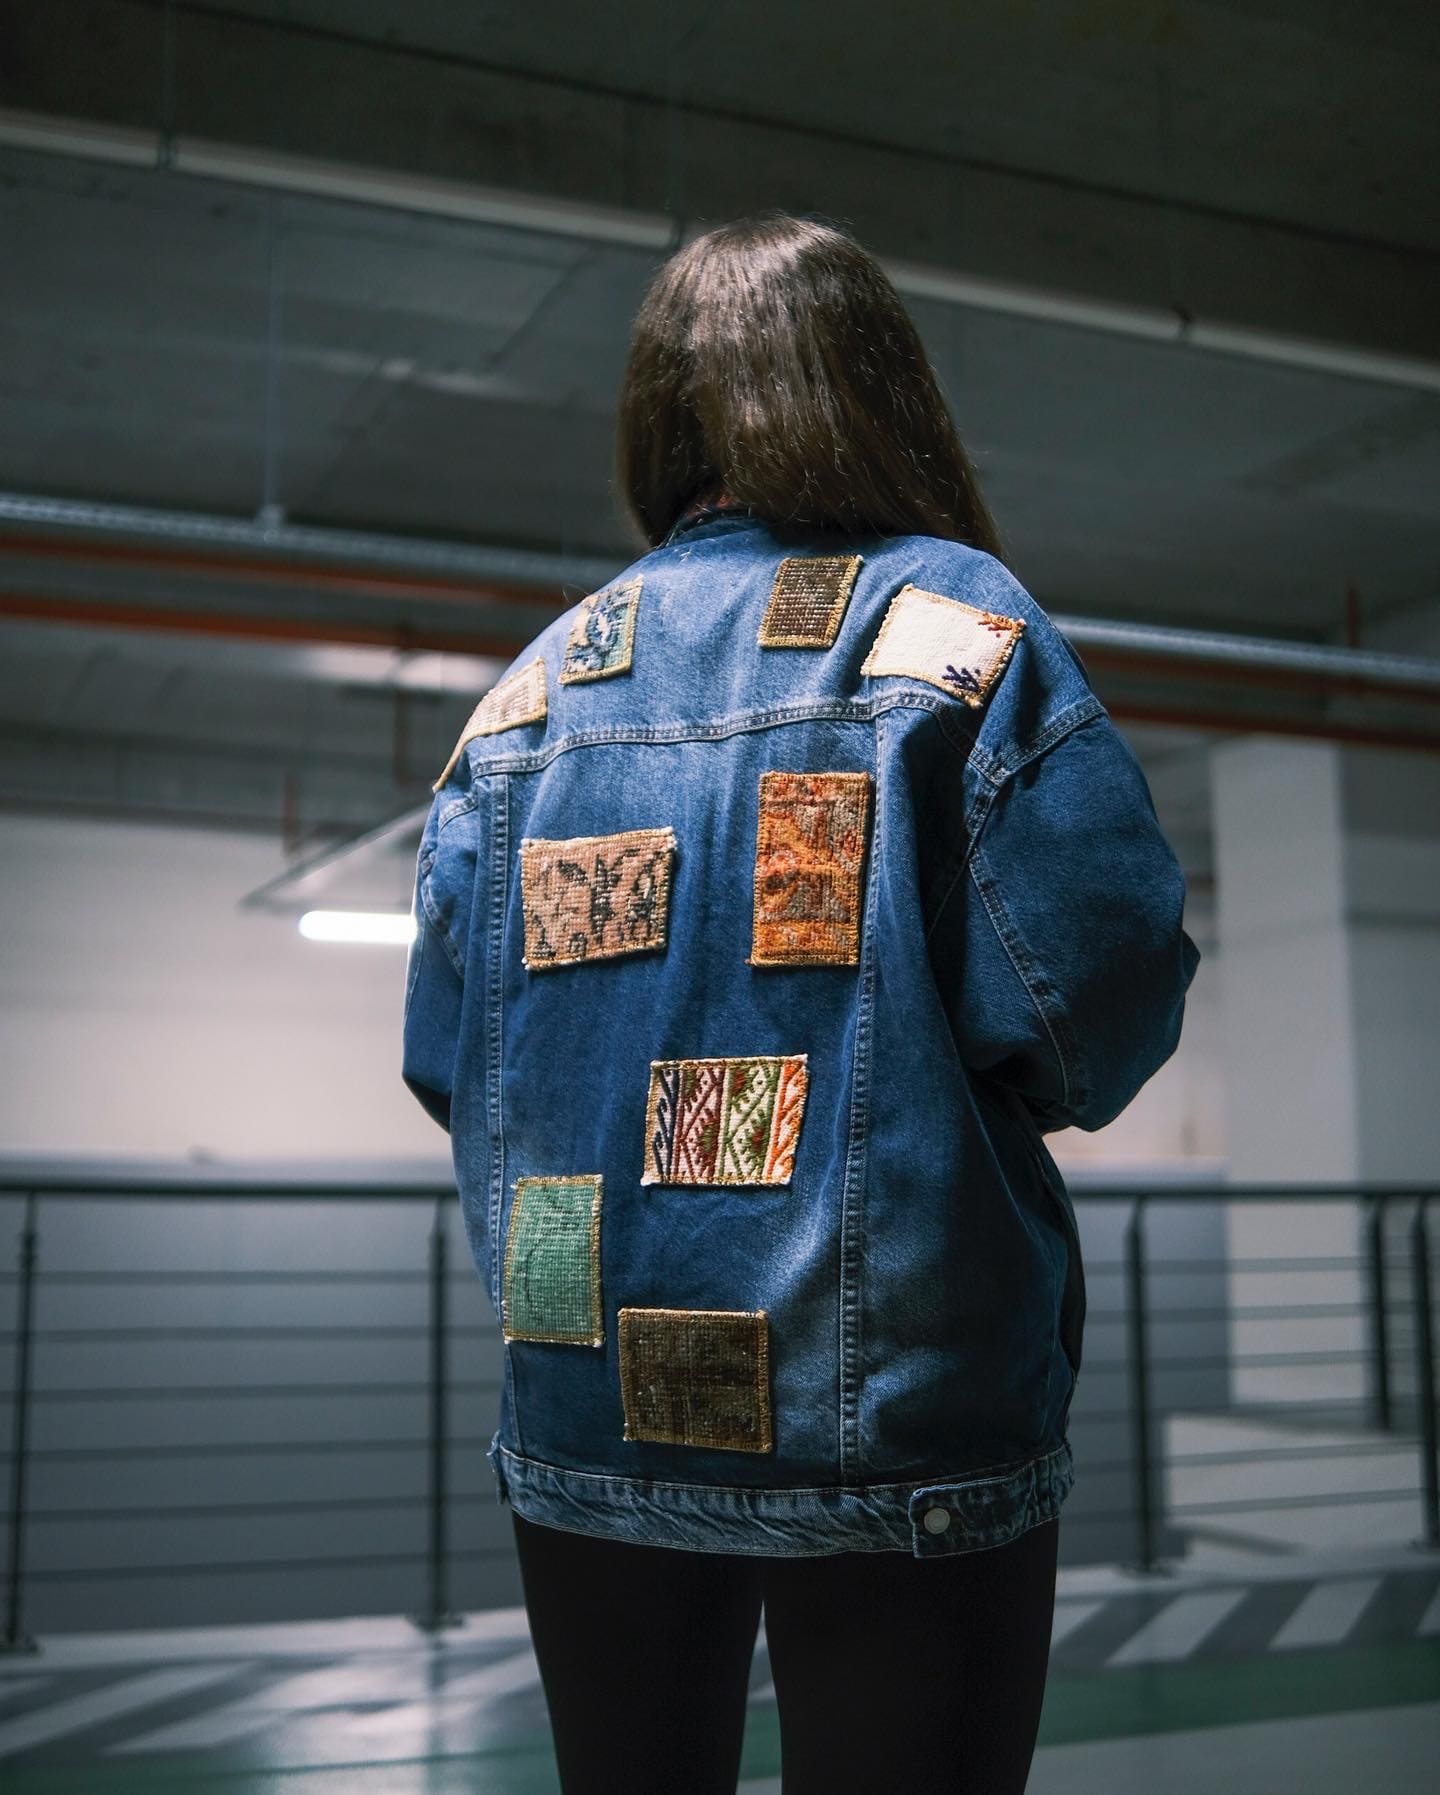 Unique Custom Patches for Leather, Jean and Denim Jackets